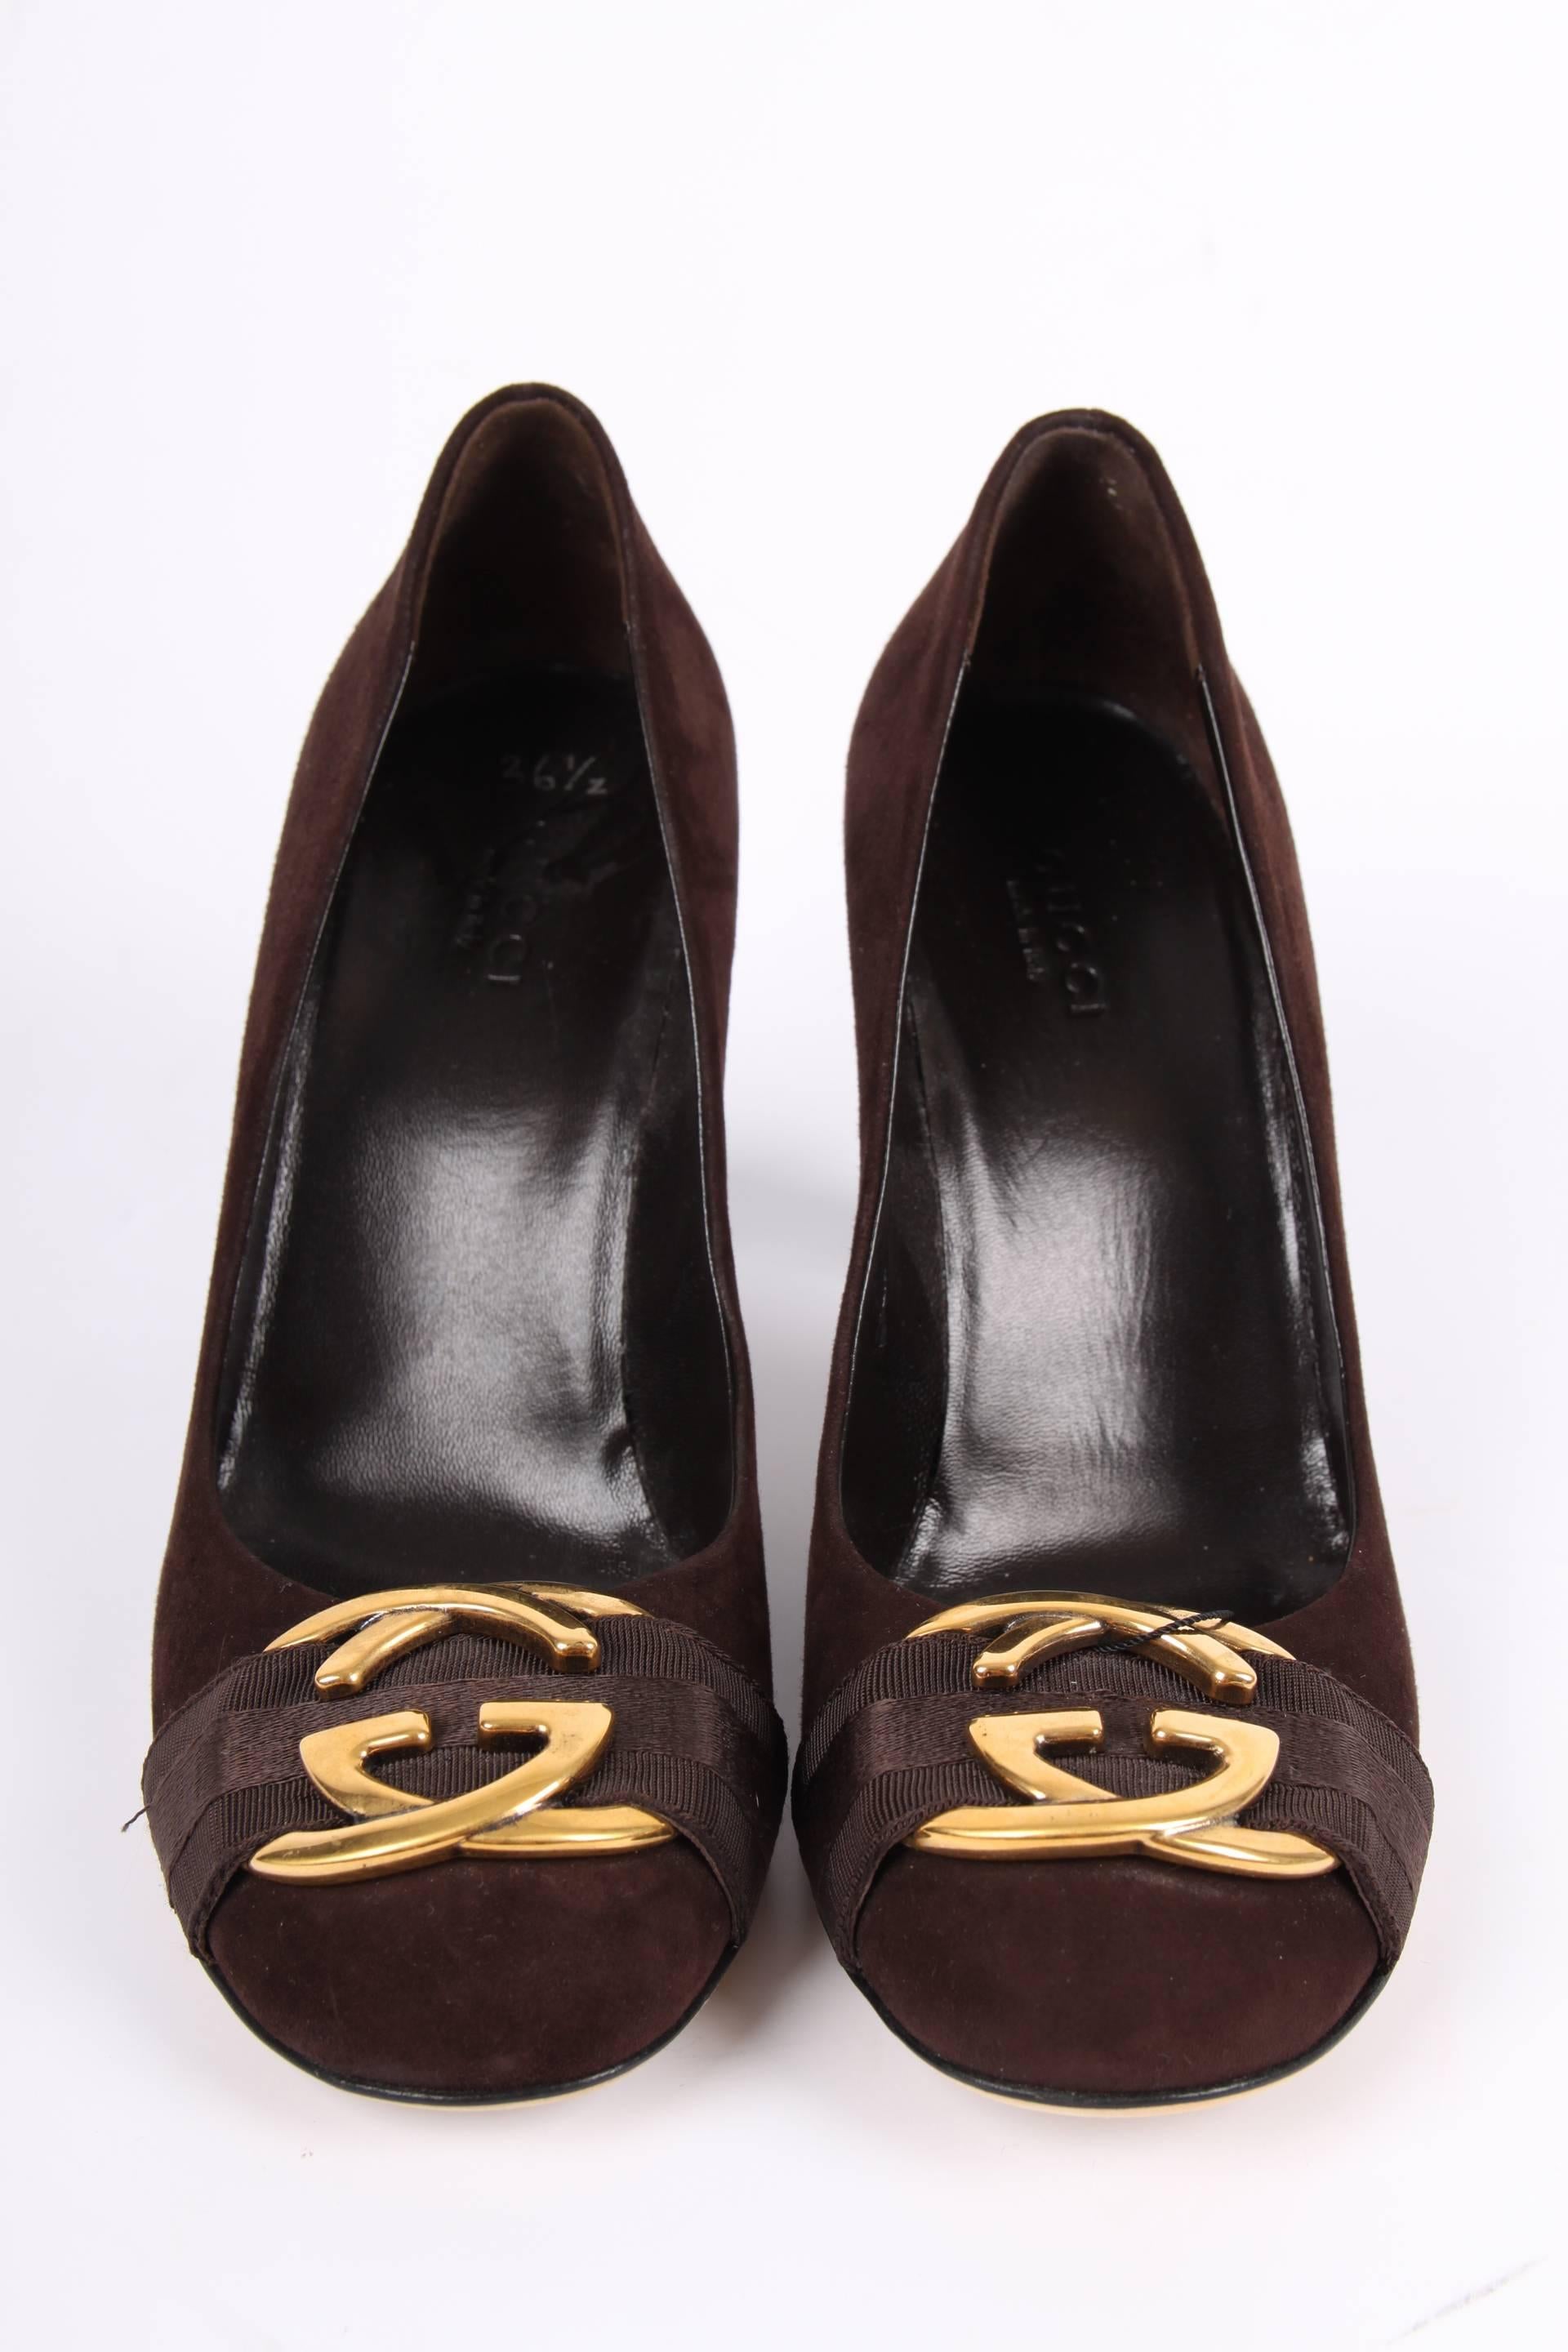 Stylish pumps by Gucci crafted in dark brown suede. Nice!

The heels measure 8,5 centimeters, no platform. On the round shaped toe a gold-tone GG logo is applied as well as a canvas strap. Fully lined with black leather. A leather outsole.

In very